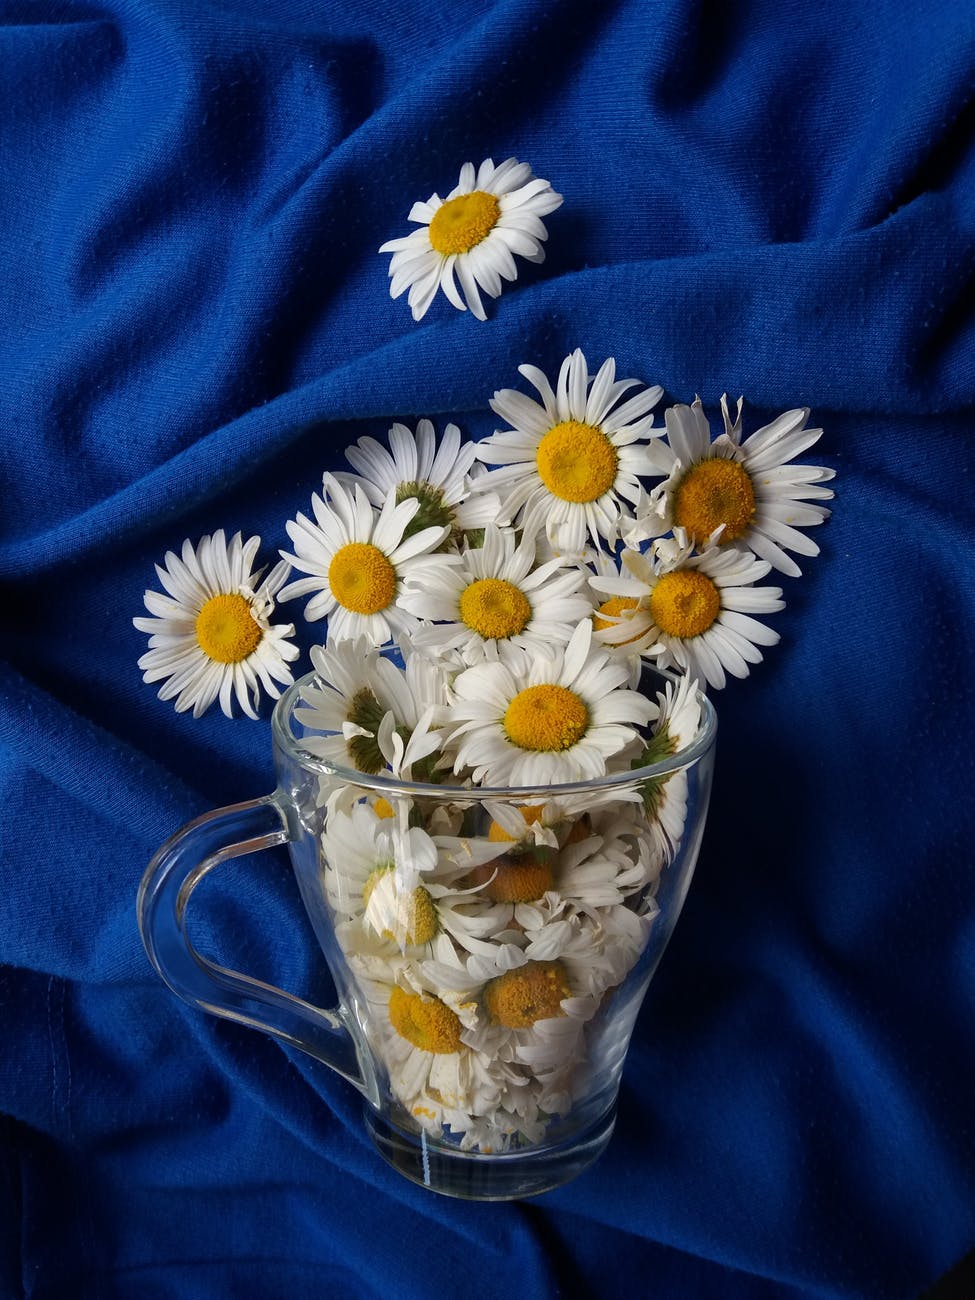 close up on daisies in glass